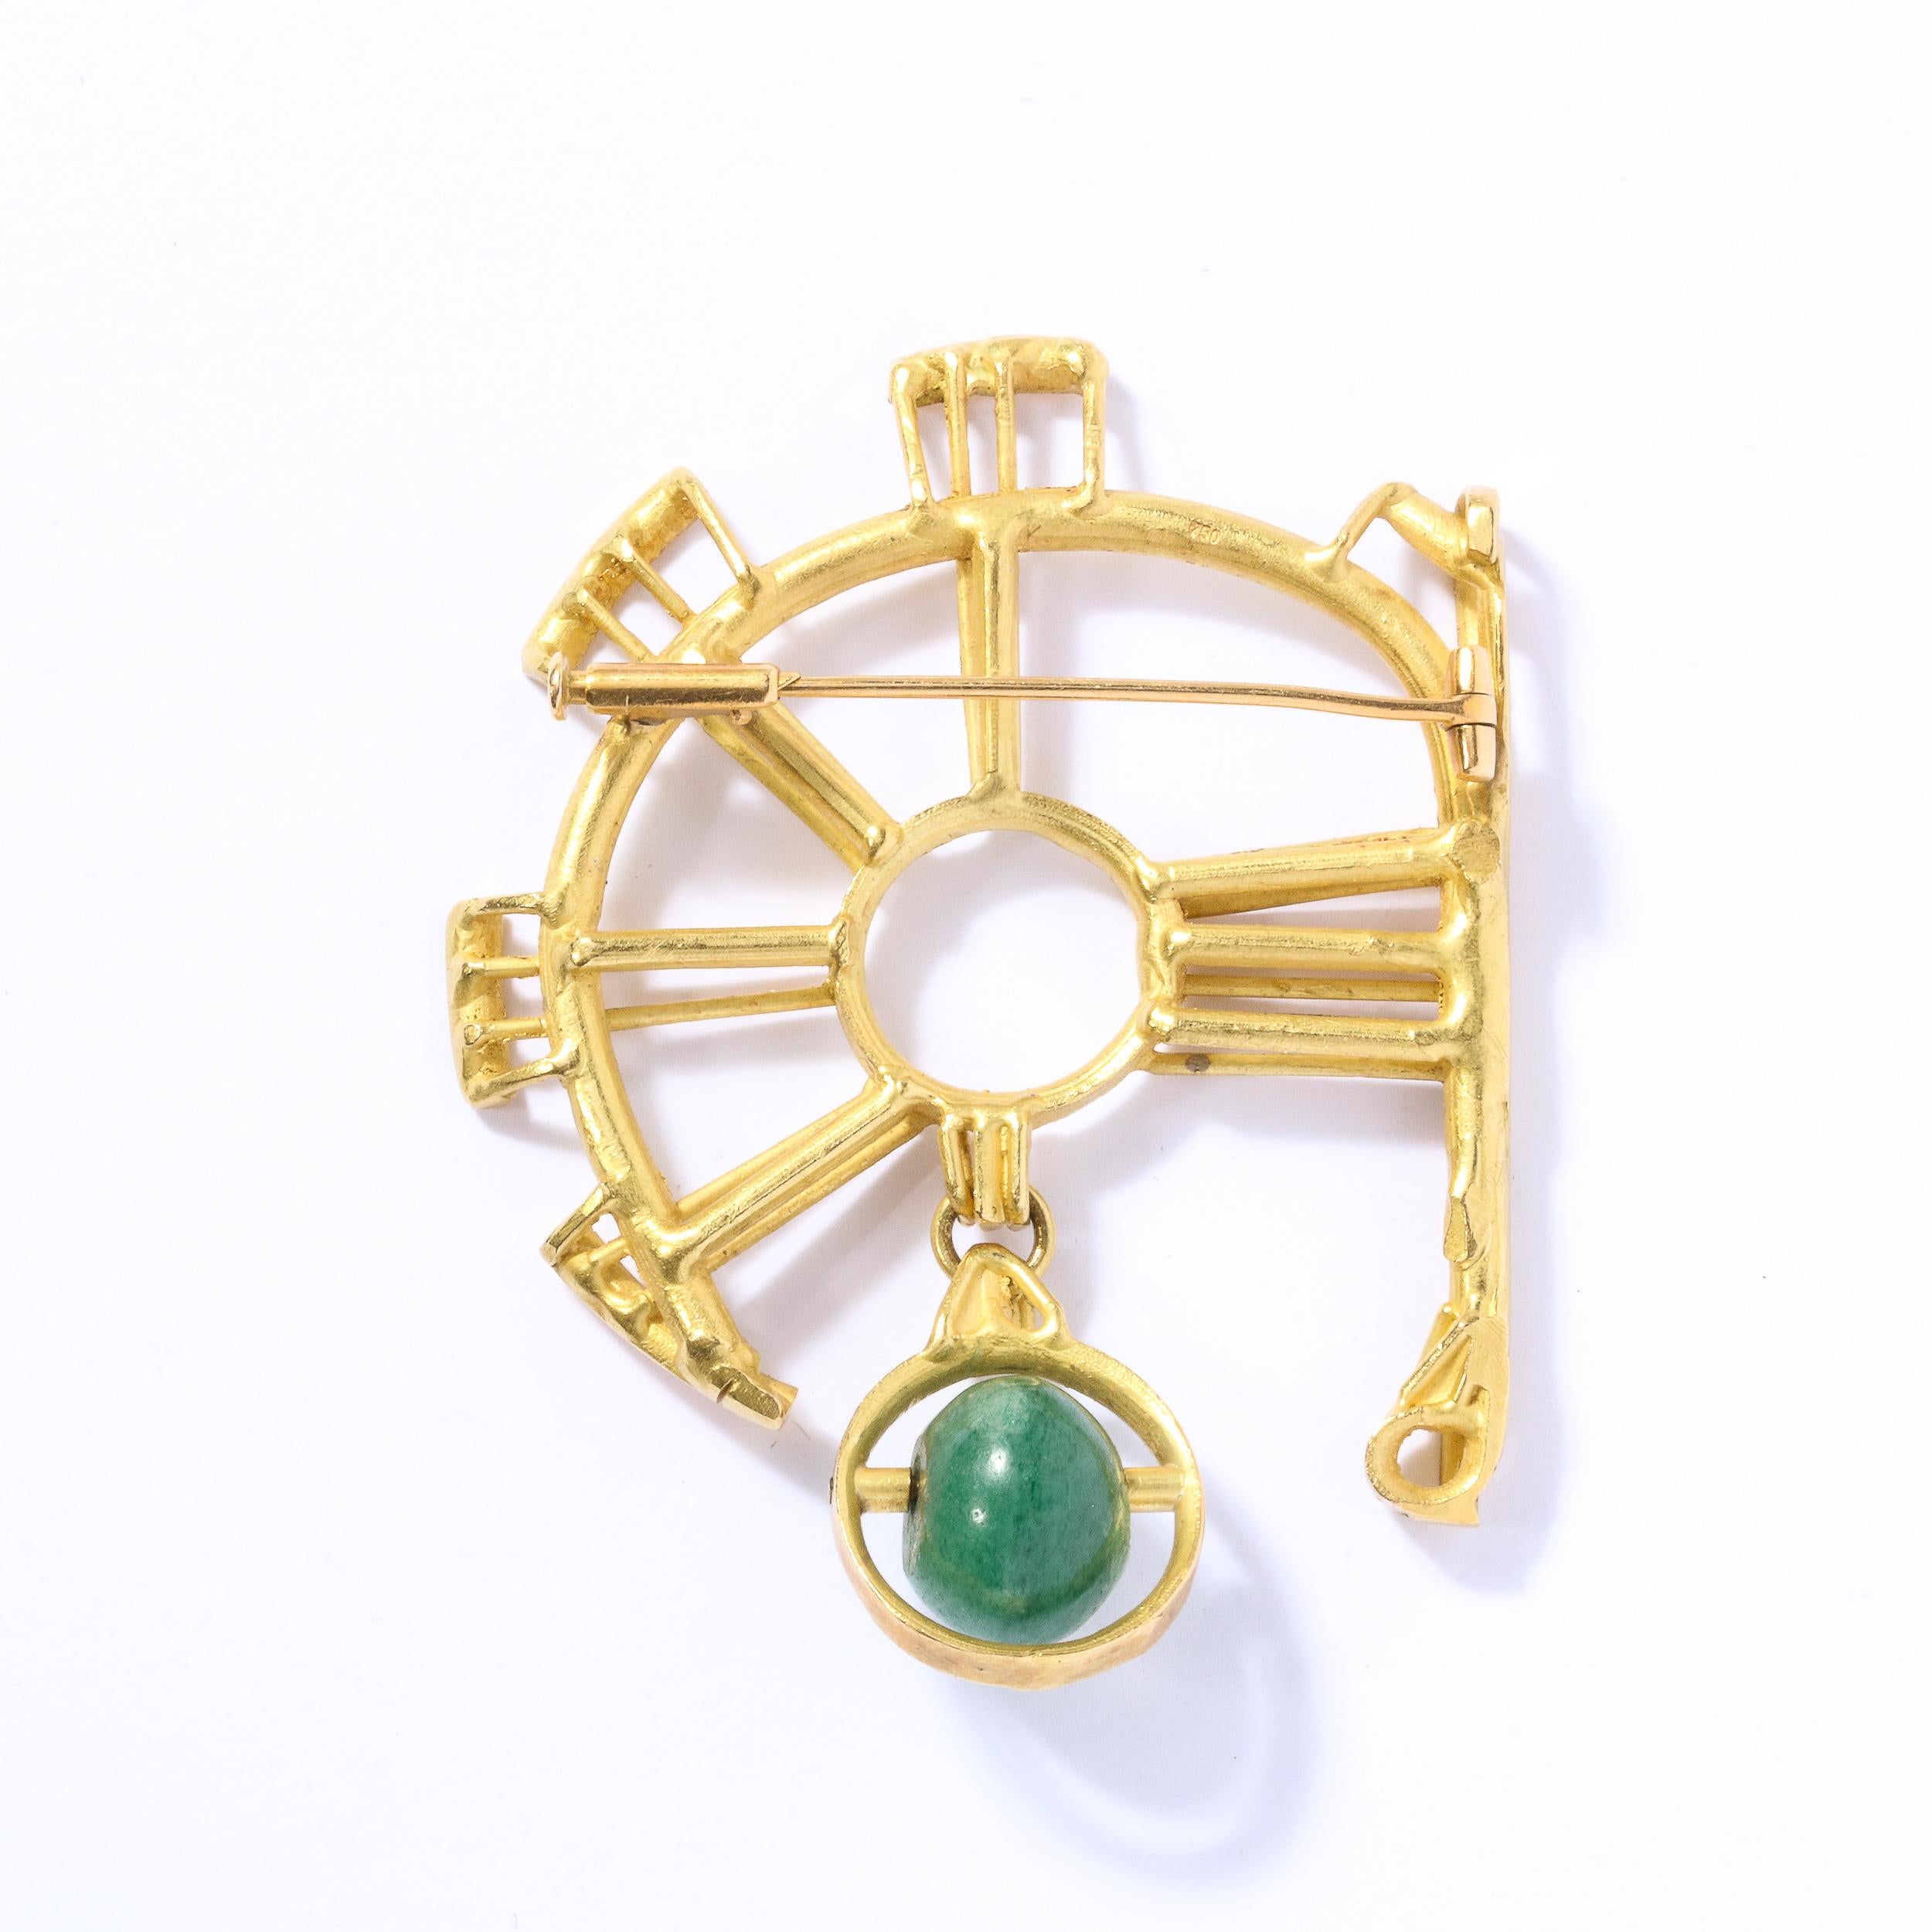 Women's Sophisticated Mid-Century Modernist Serpentine Jade Gold Brooch For Sale